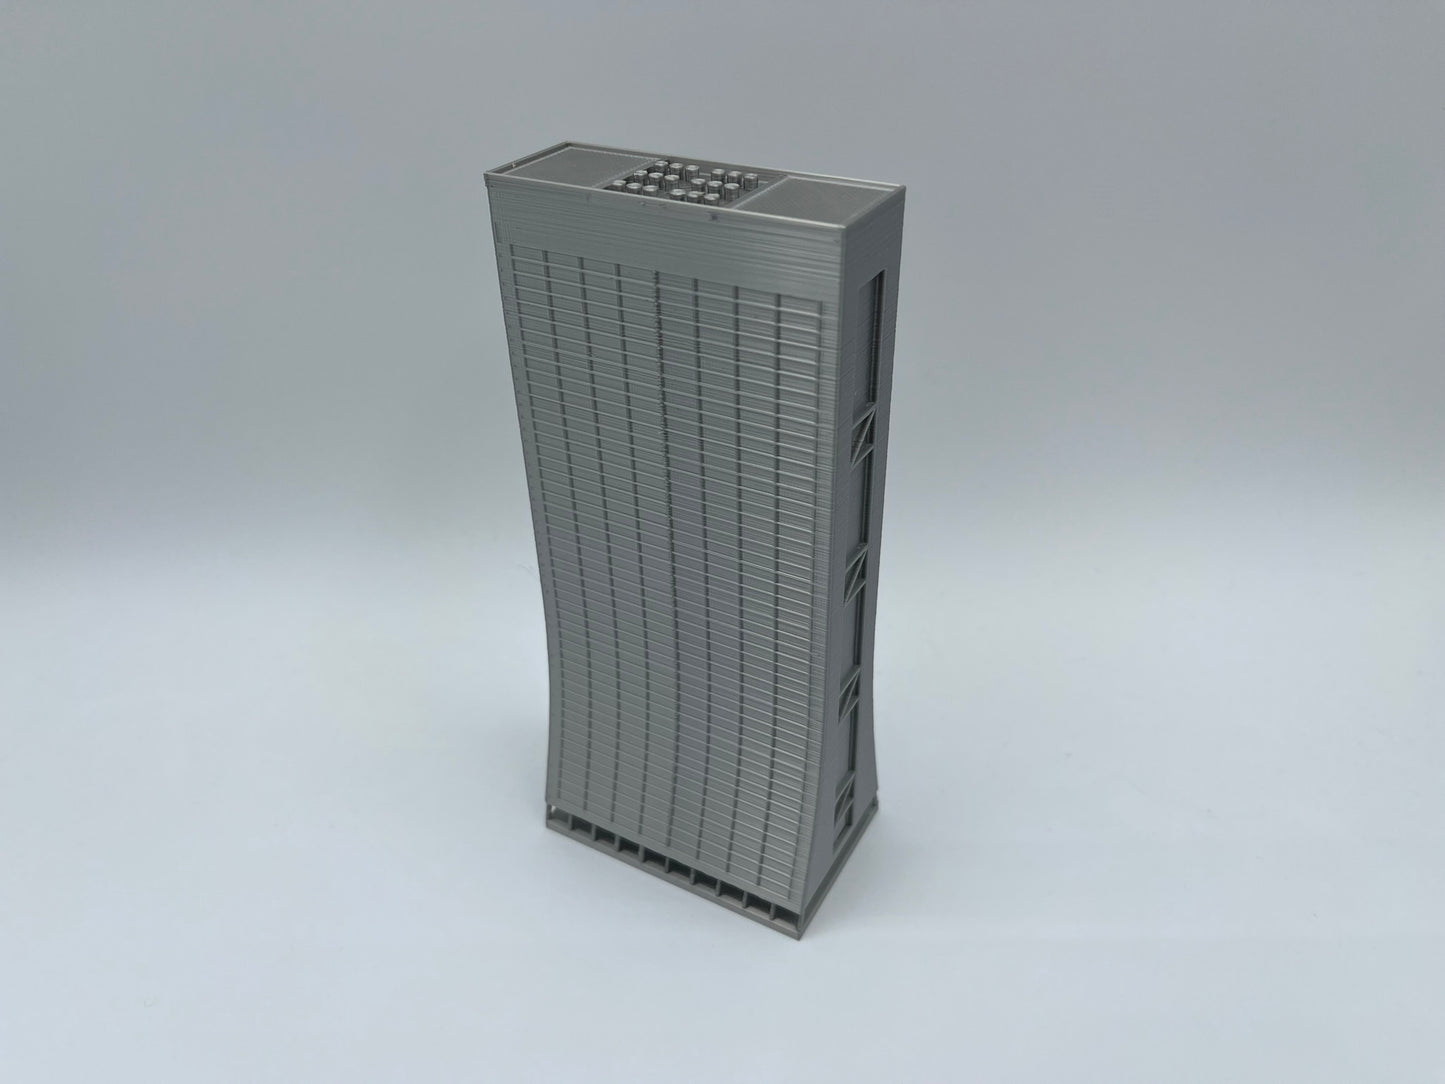 Solow Building Model- 3D Printed